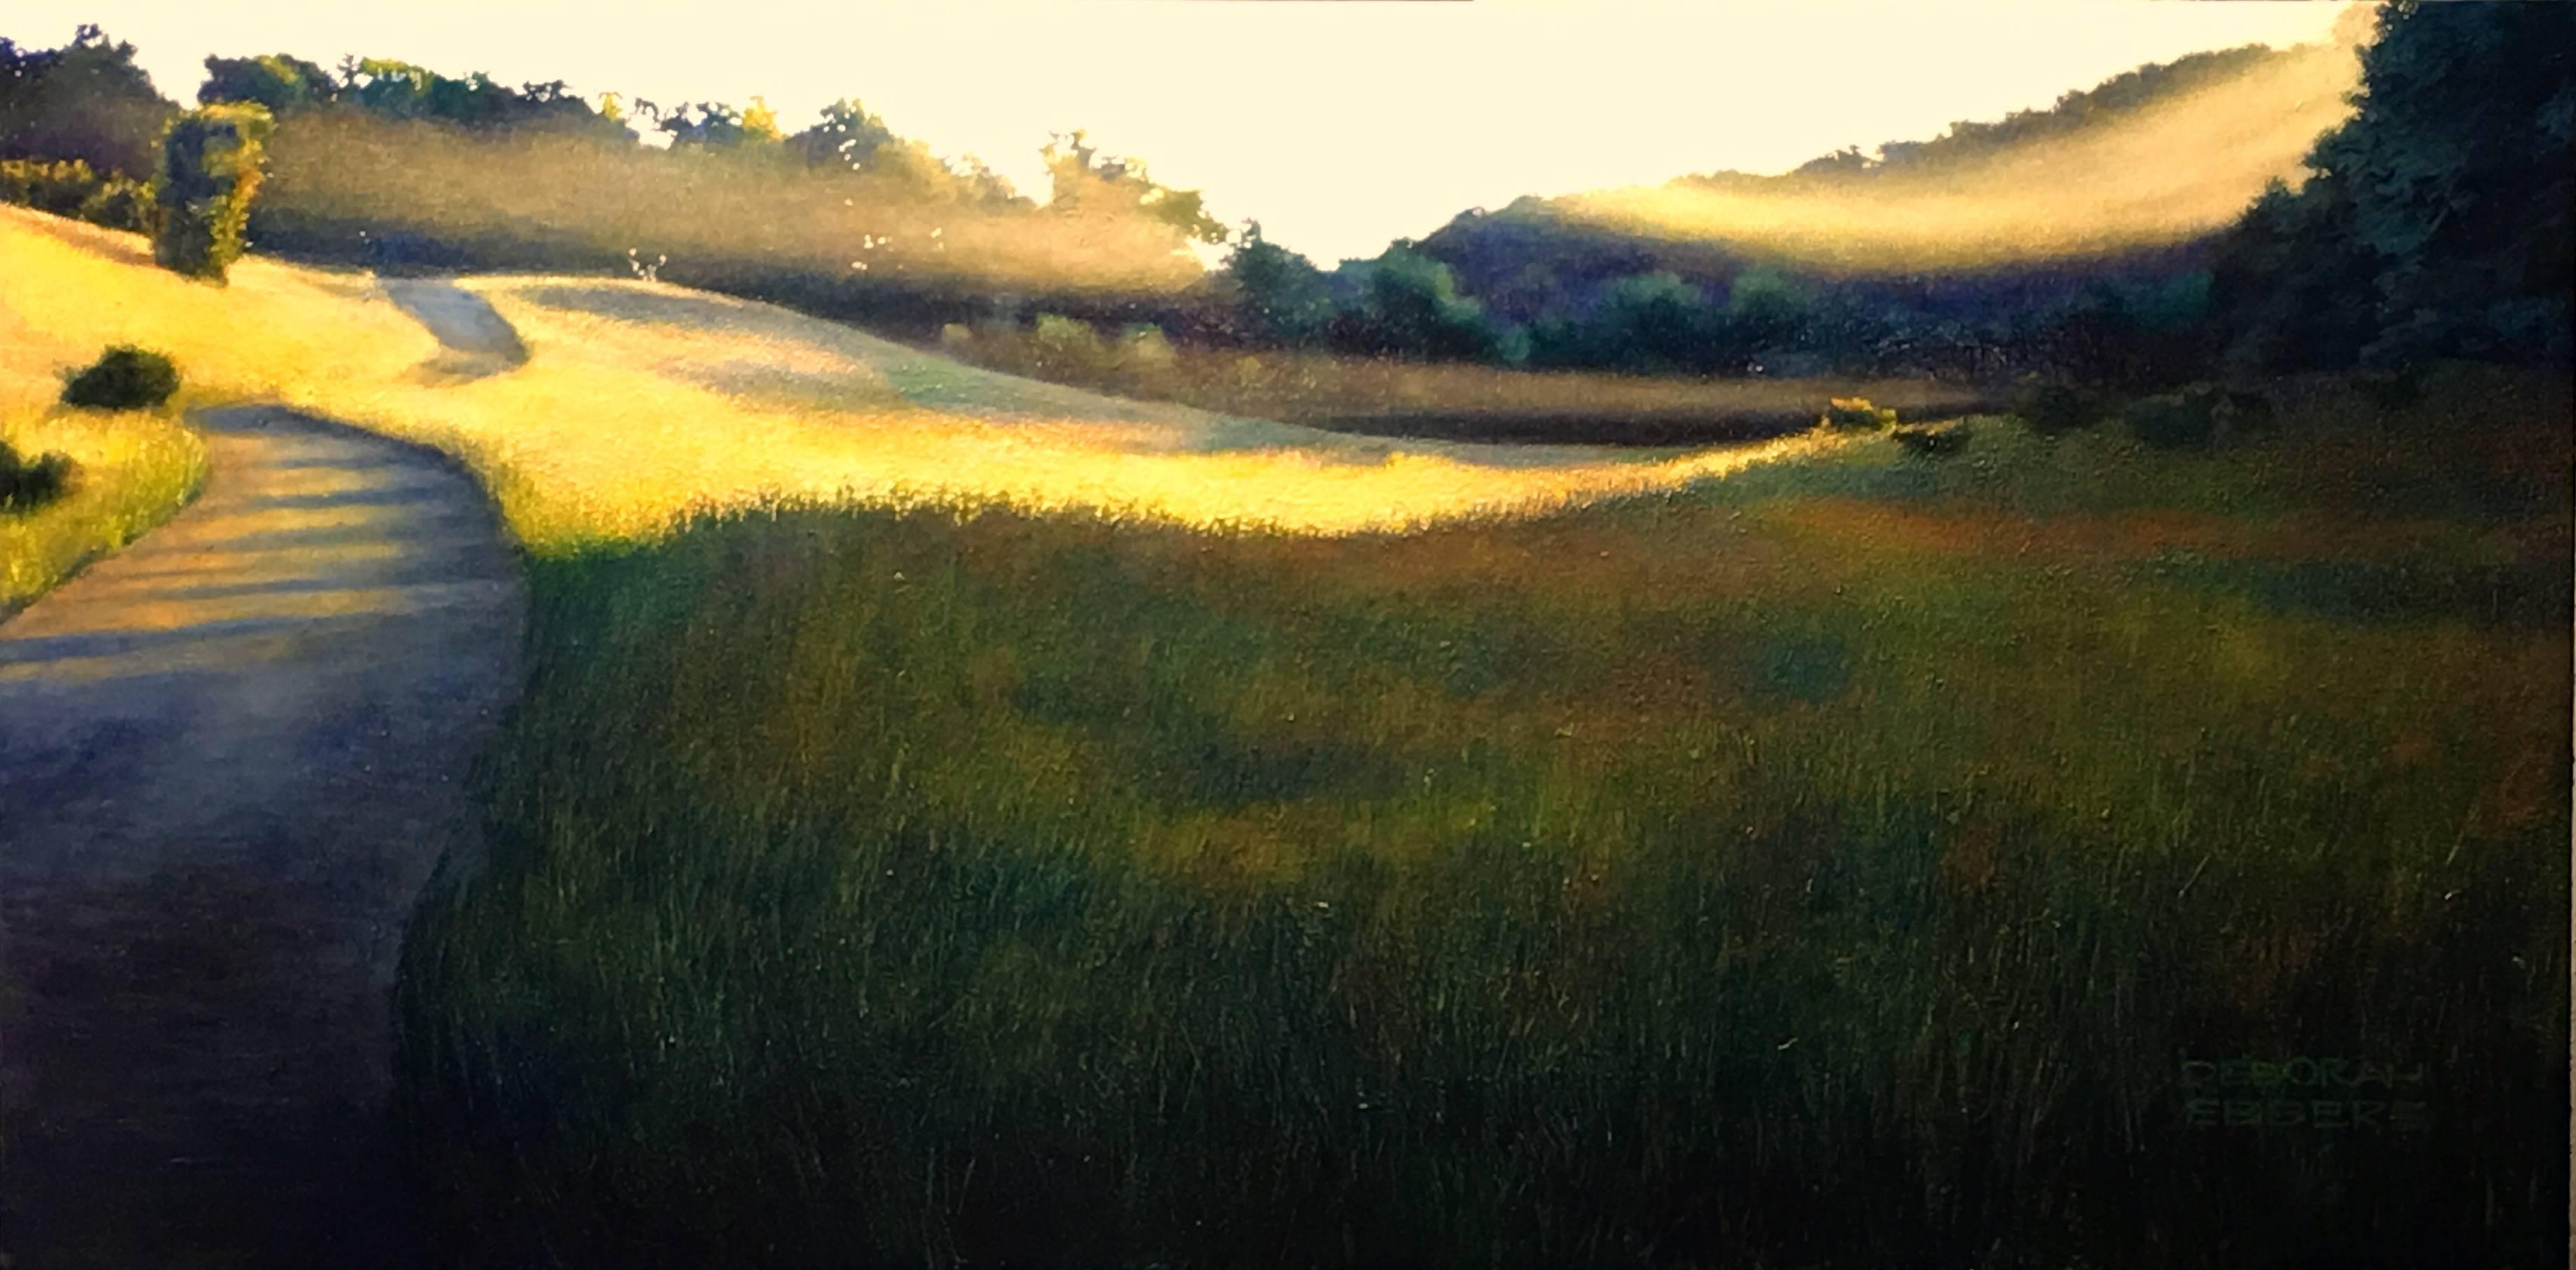 Deborah Ebbers Landscape Painting - The Lifting Veil - Original Oil on Canvas Painting of Mist Hovering Over a Field